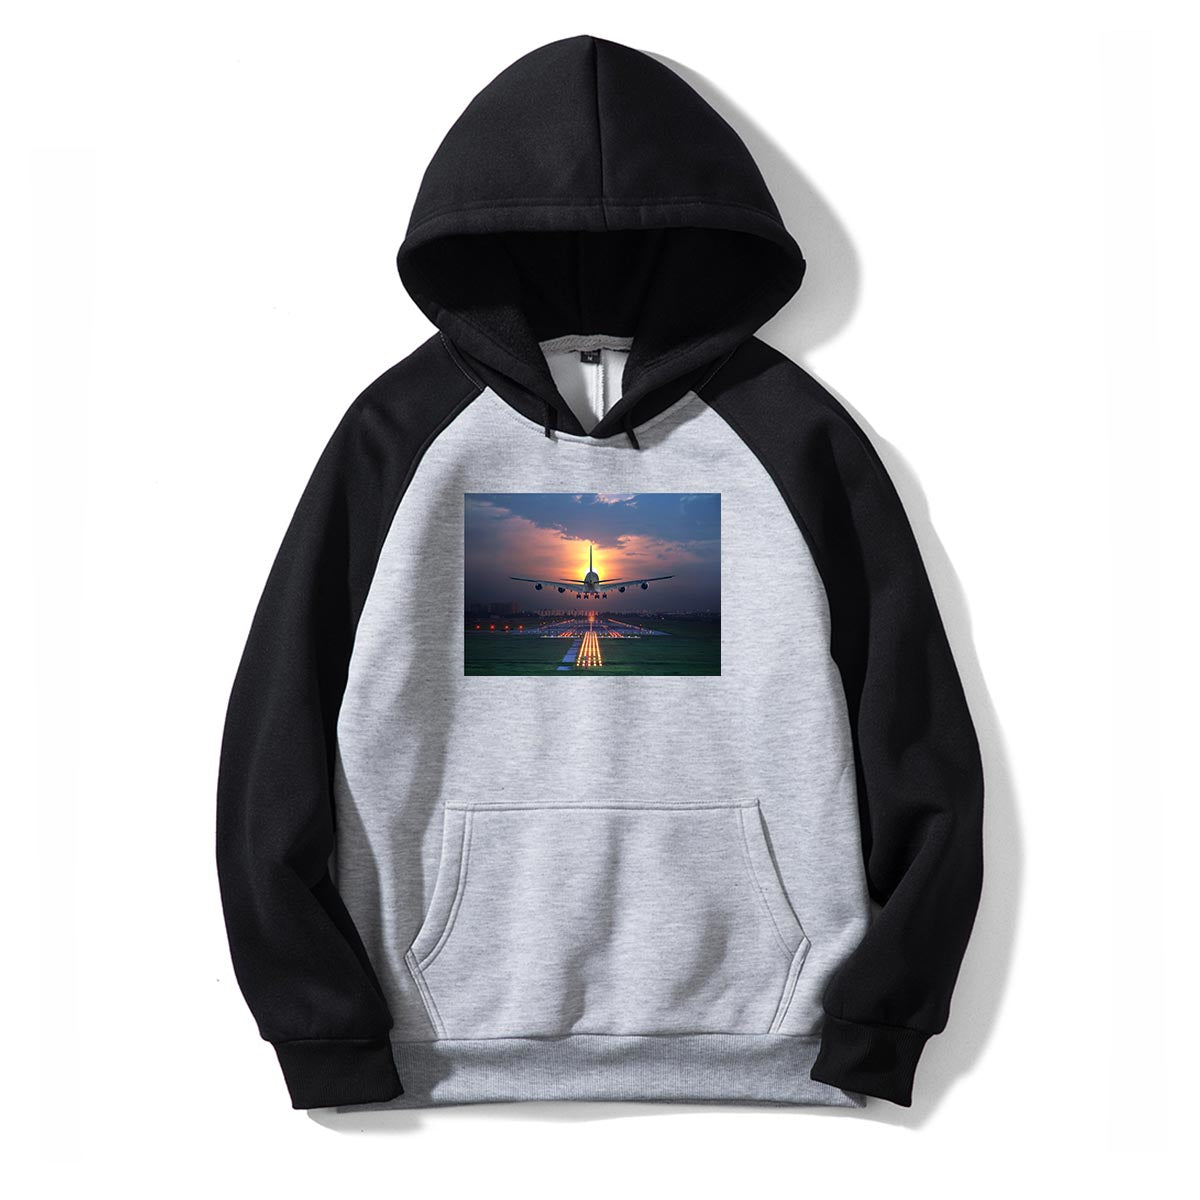 Super Airbus A380 Landing During Sunset Designed Colourful Hoodies